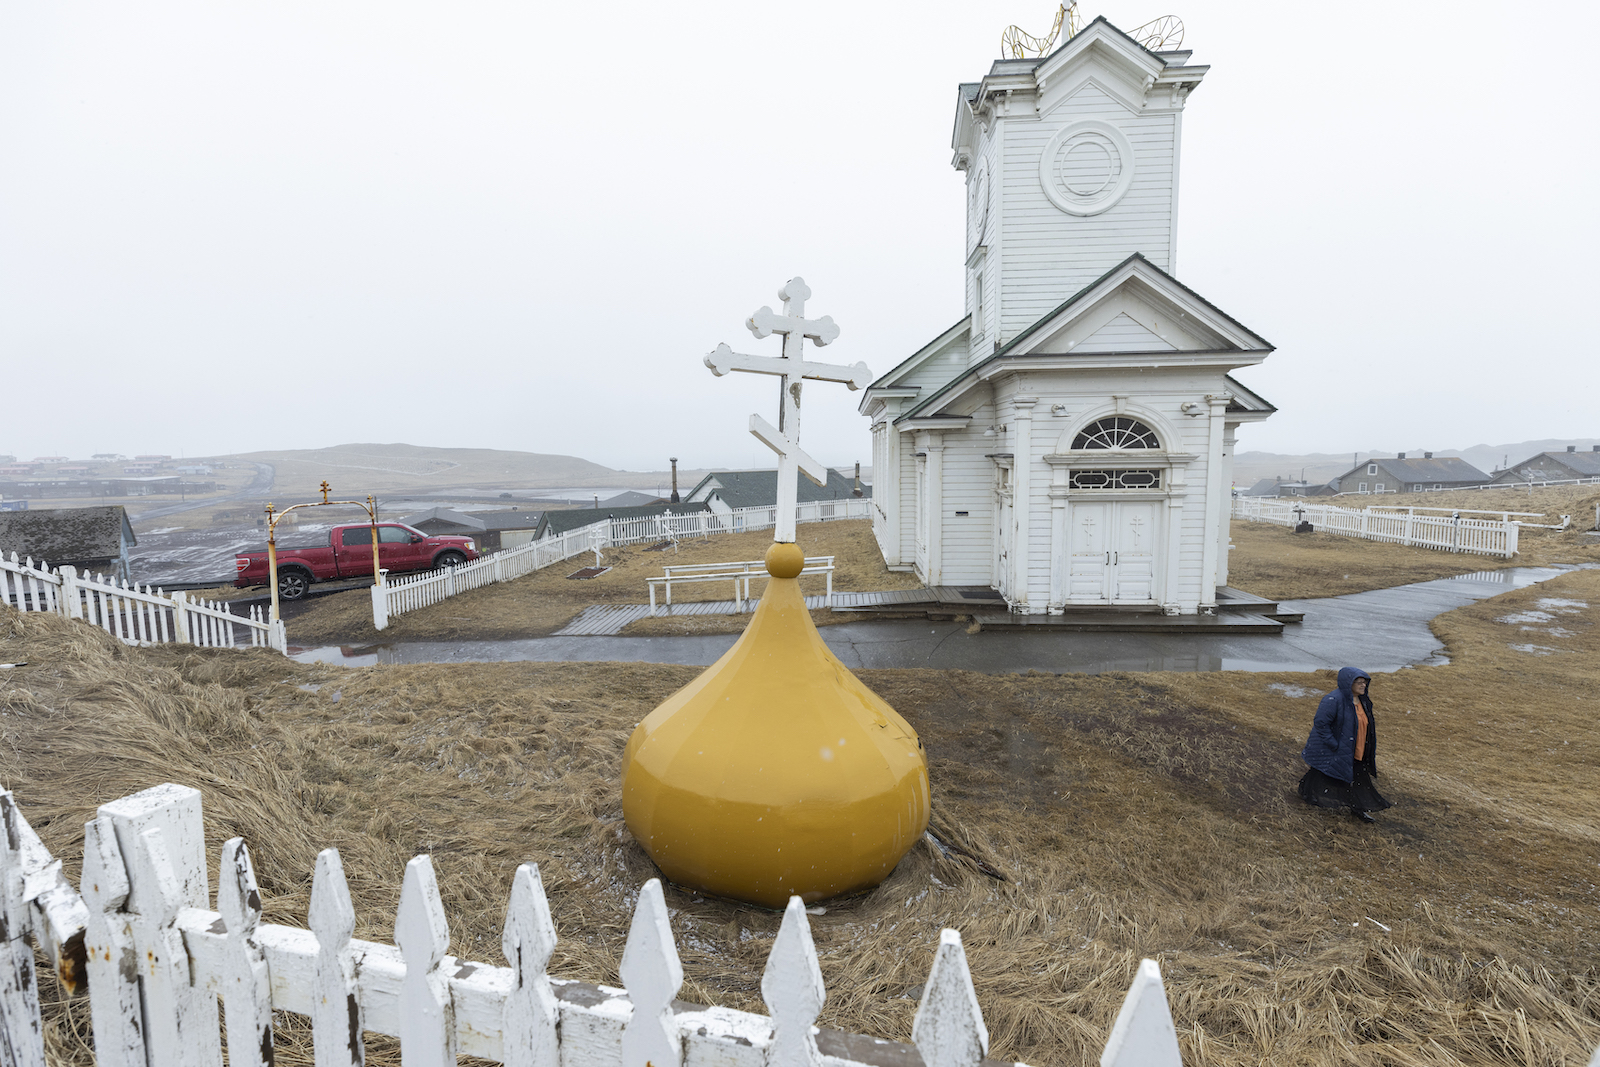 A small white church surrounded by a white fence. In front is a bright yellow buoy with a cross on top